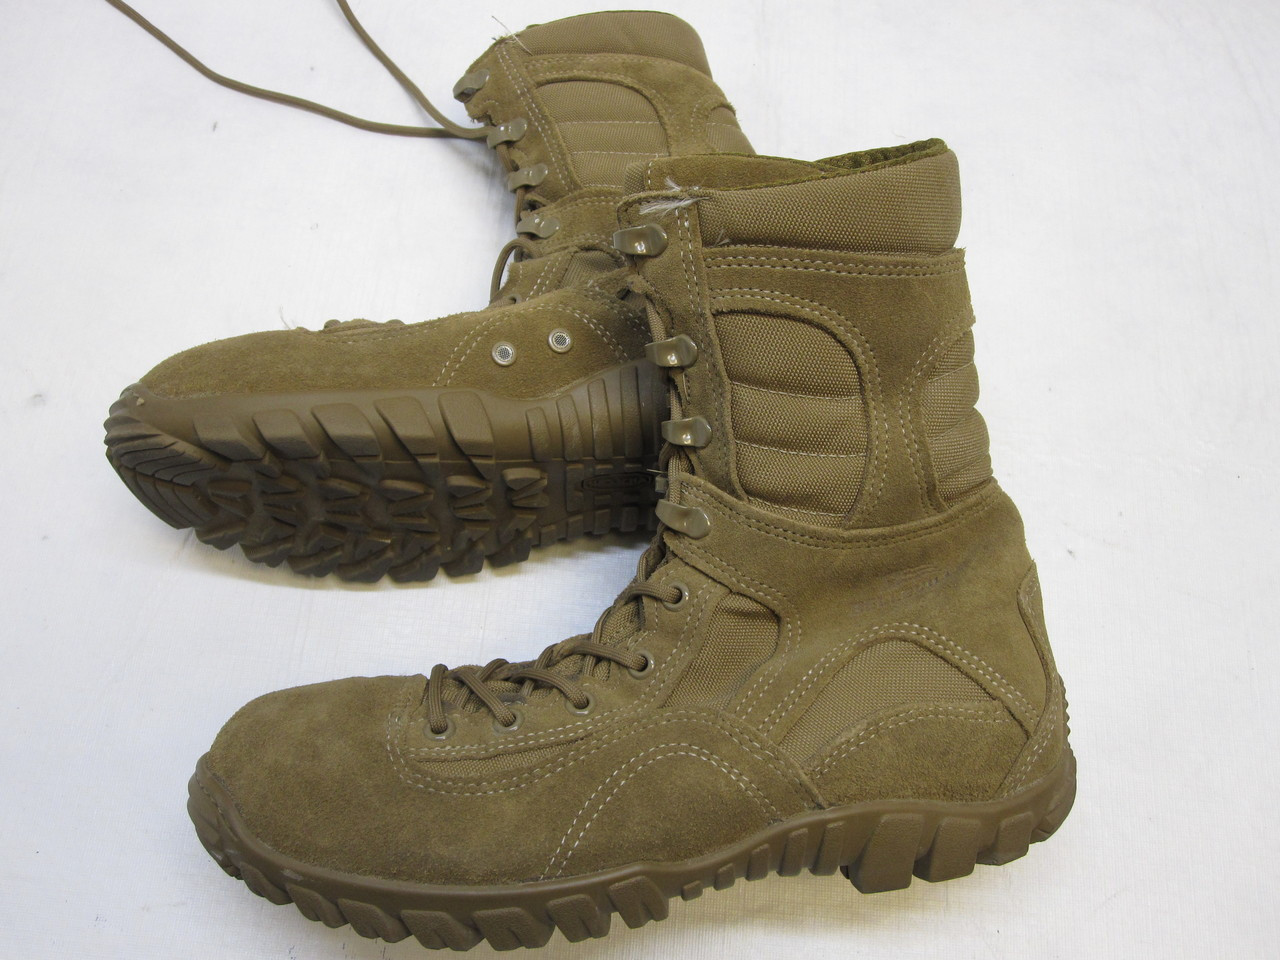 ARMY OCP BELLEVILLE 333 COMBAT BOOTS SABRE 9 WIDE COYOTE BROWN